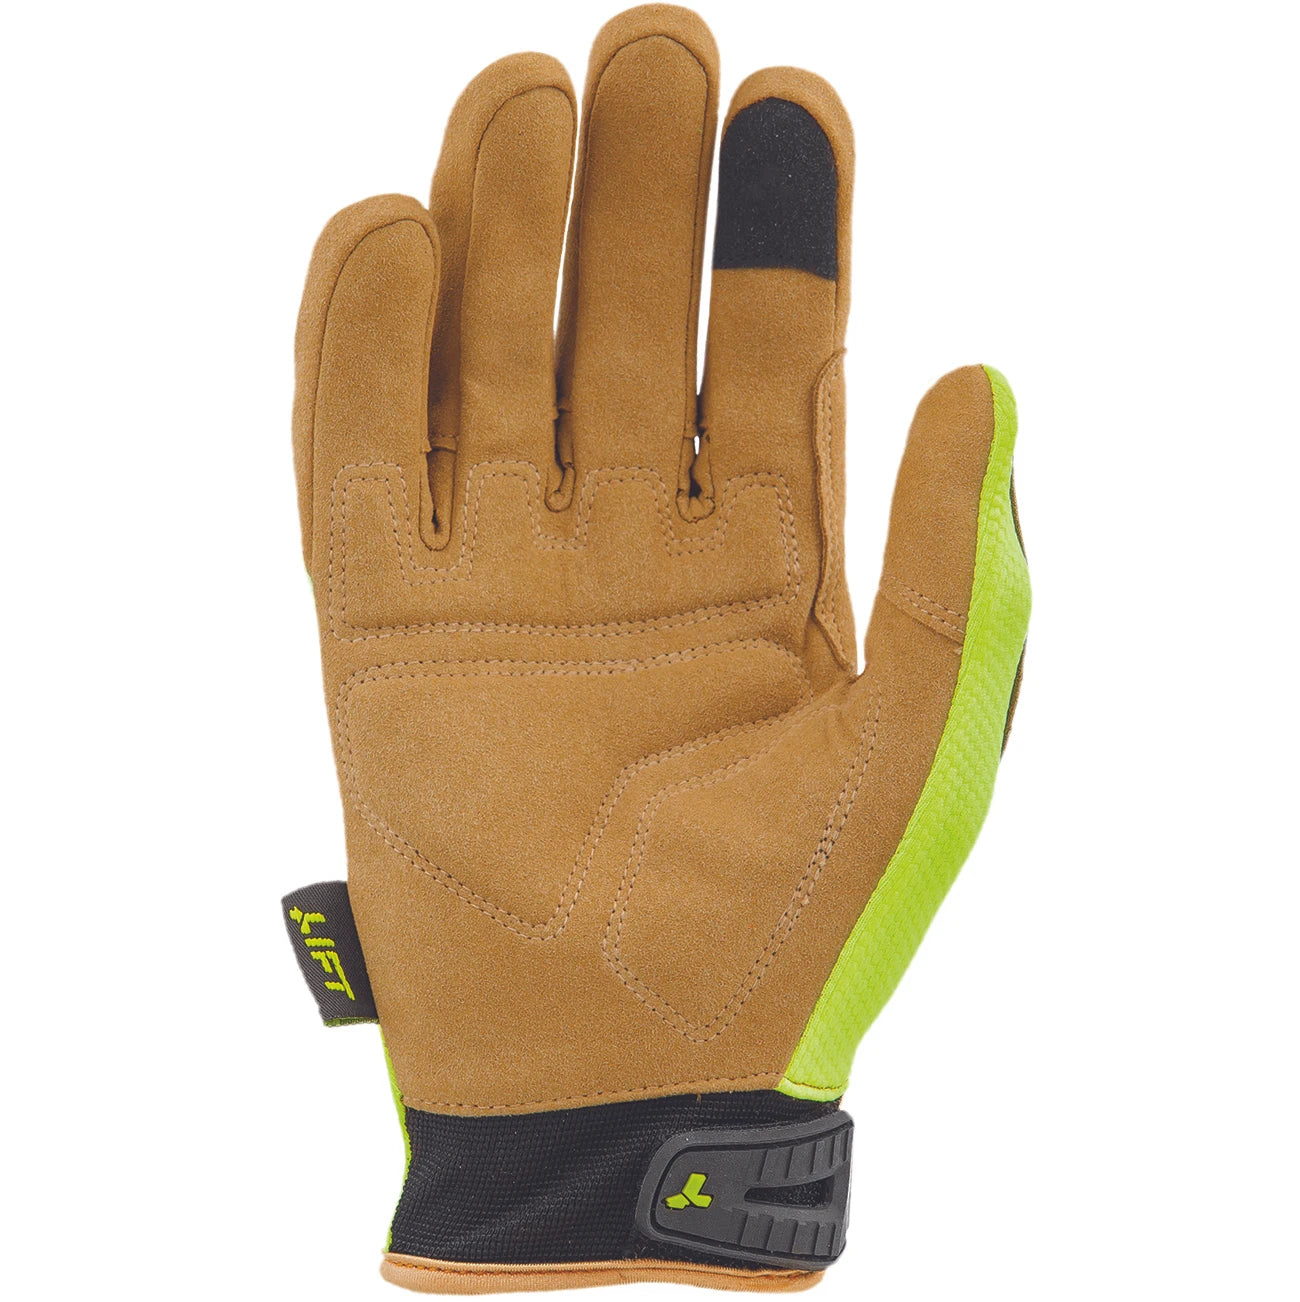 OPTION Glove (Hi-Viz)- Synthetic Leather with Air Mesh